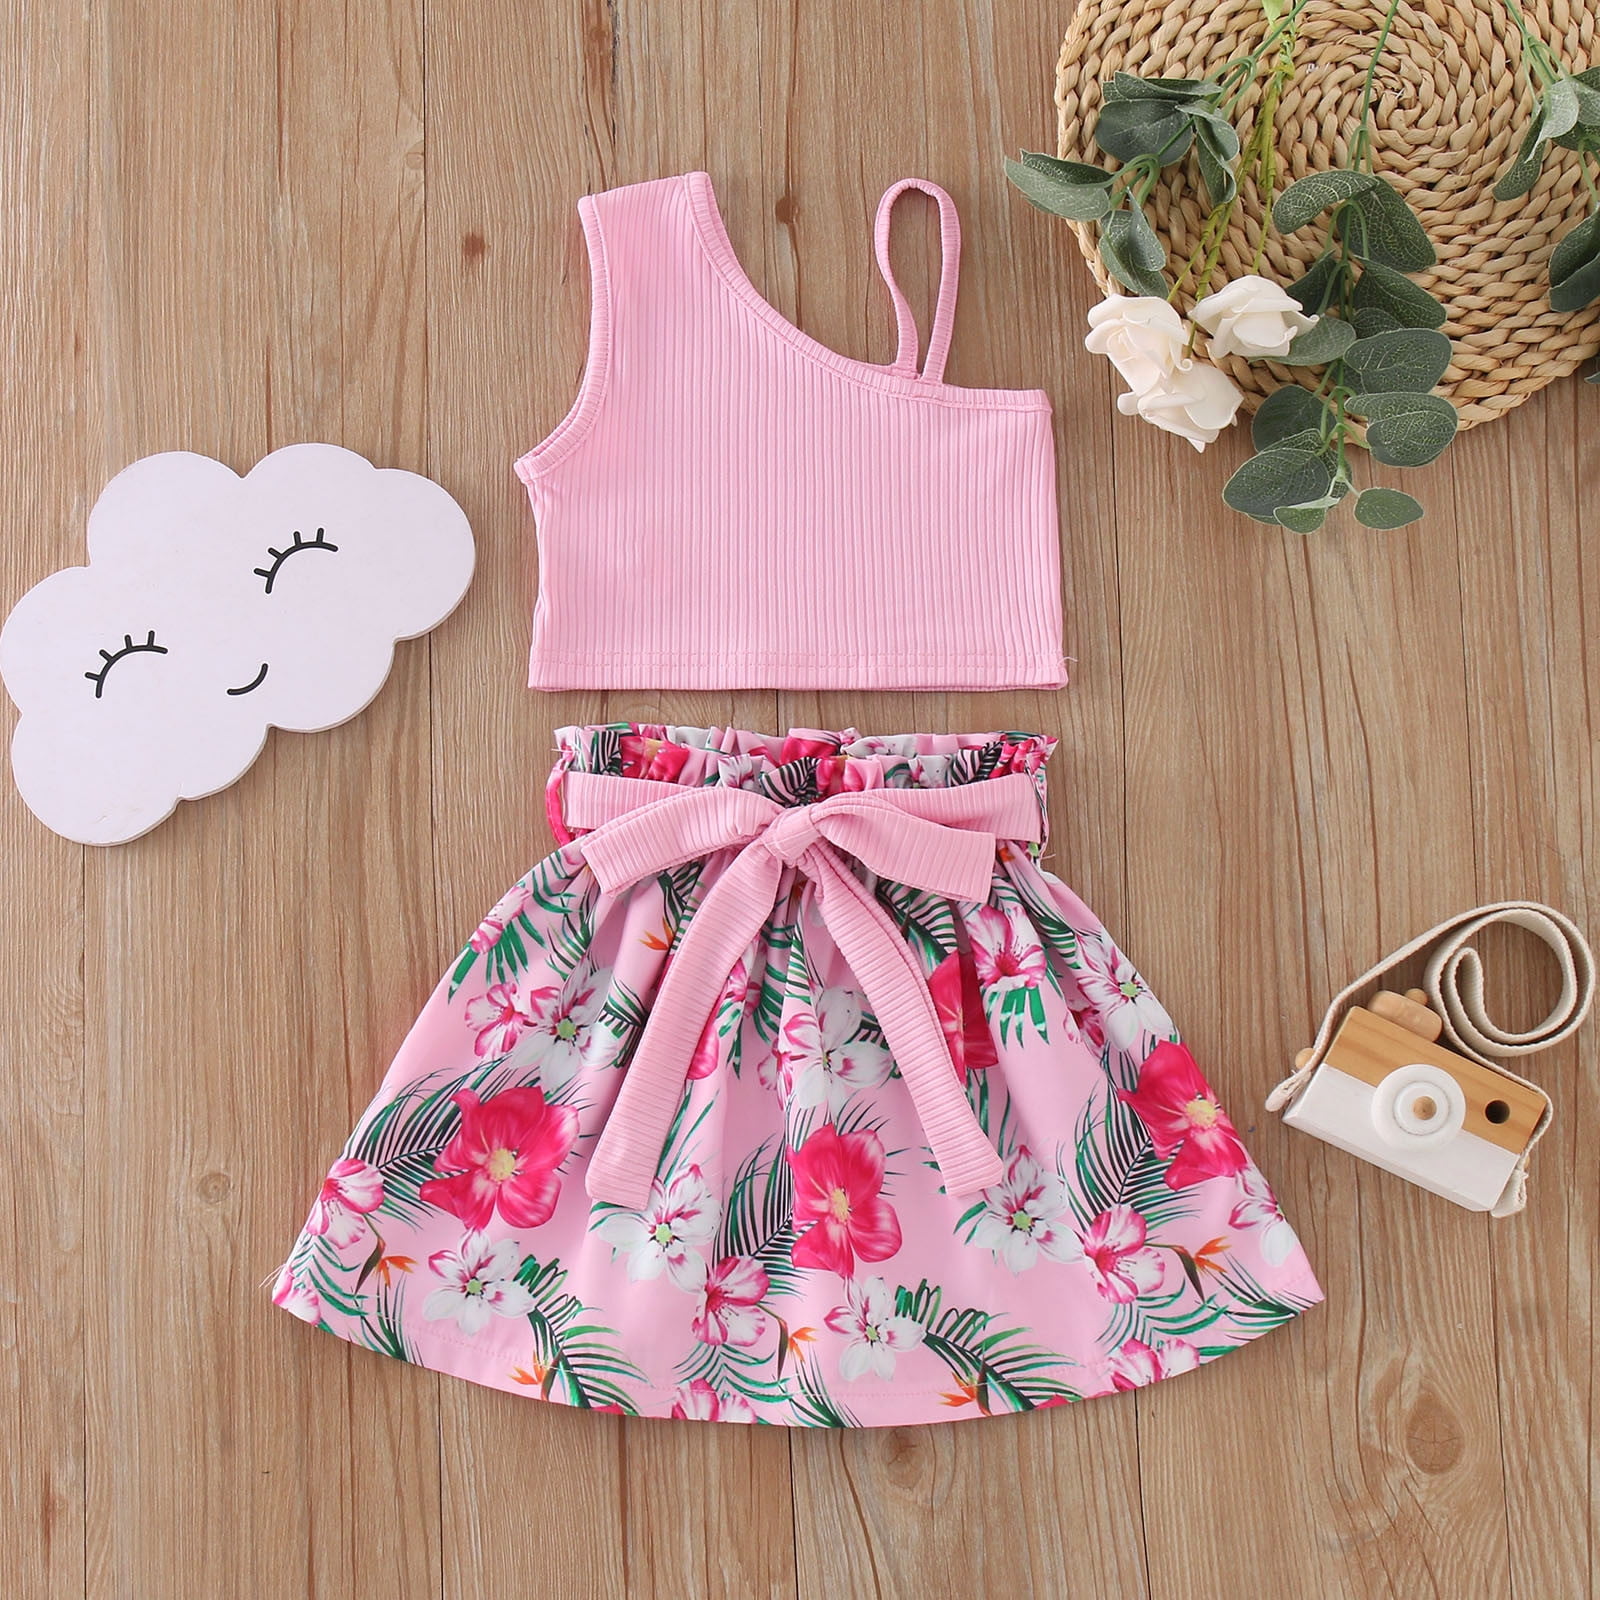 Zhaghmin Cute Clothes for Girls 10-12 Toddler Girls Sleeveless Floral Printed Vest Tops Bowknot Skirts Outfits Take Luck Home Clothes Wear for Teens